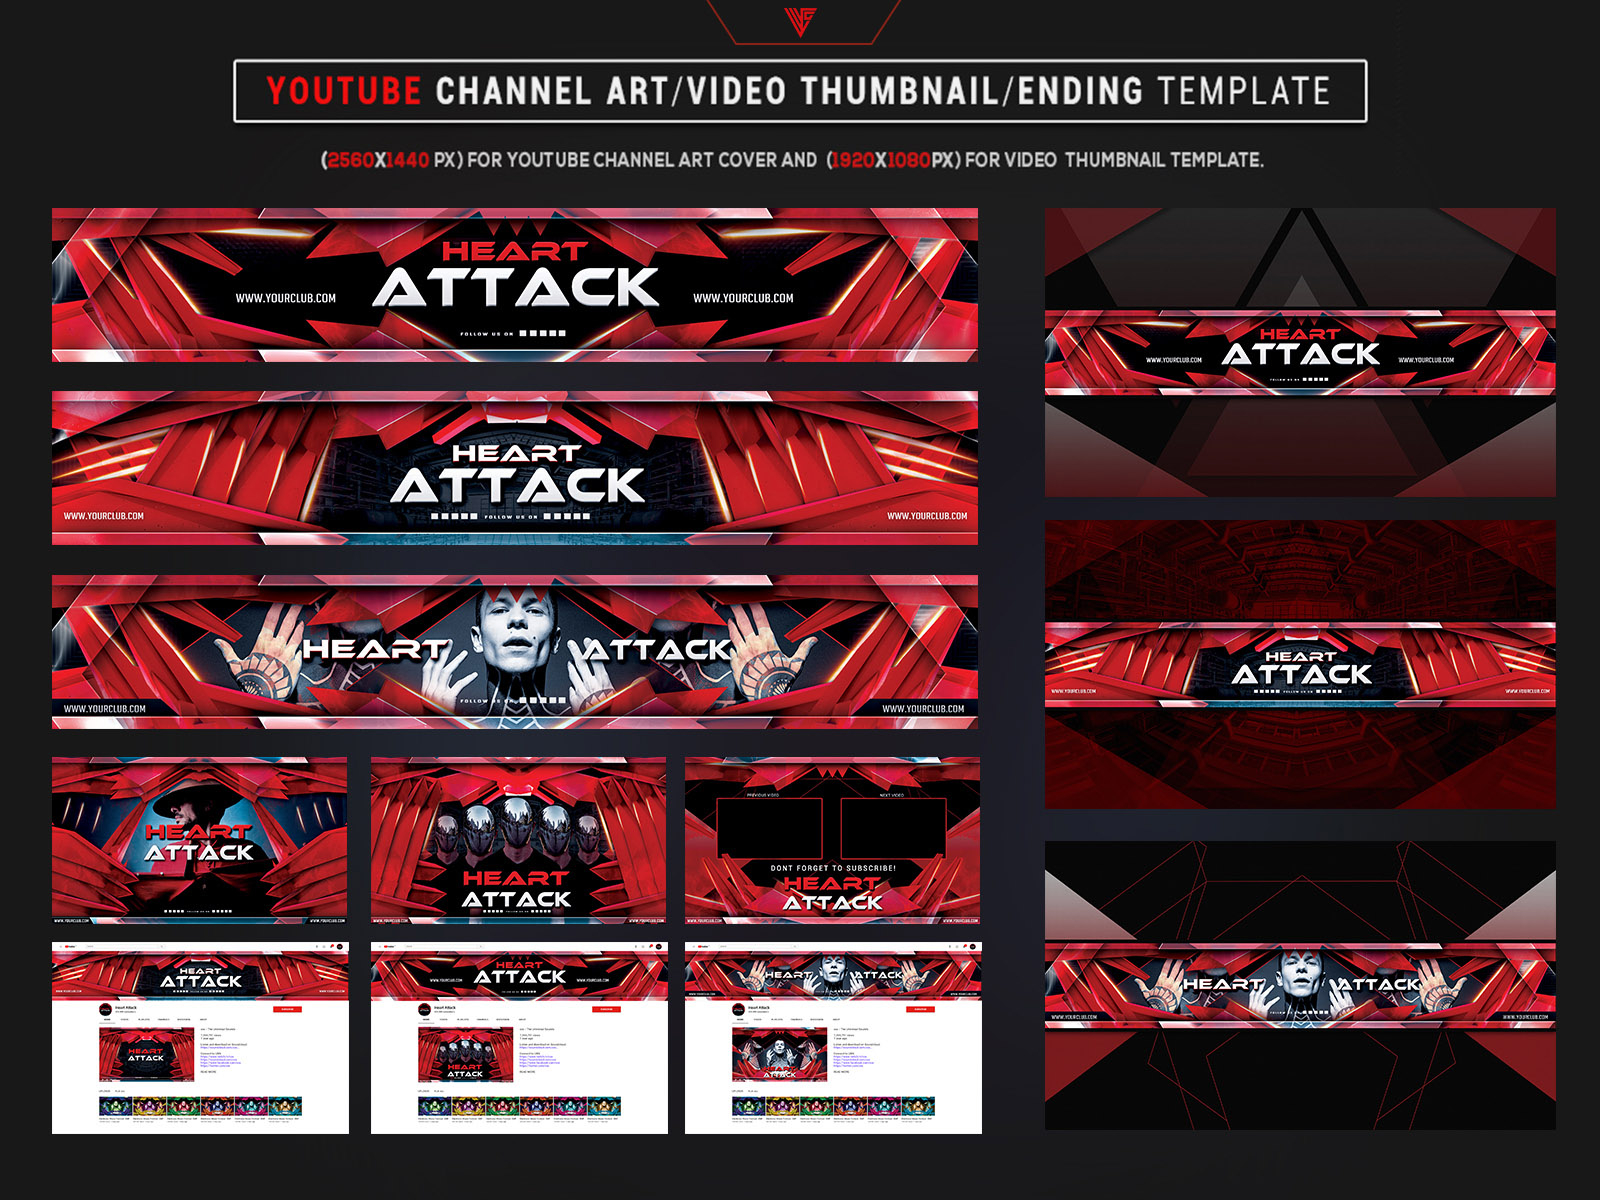 Heart Attack Youtube Channel Art Photoshop Template By Mcgraphics